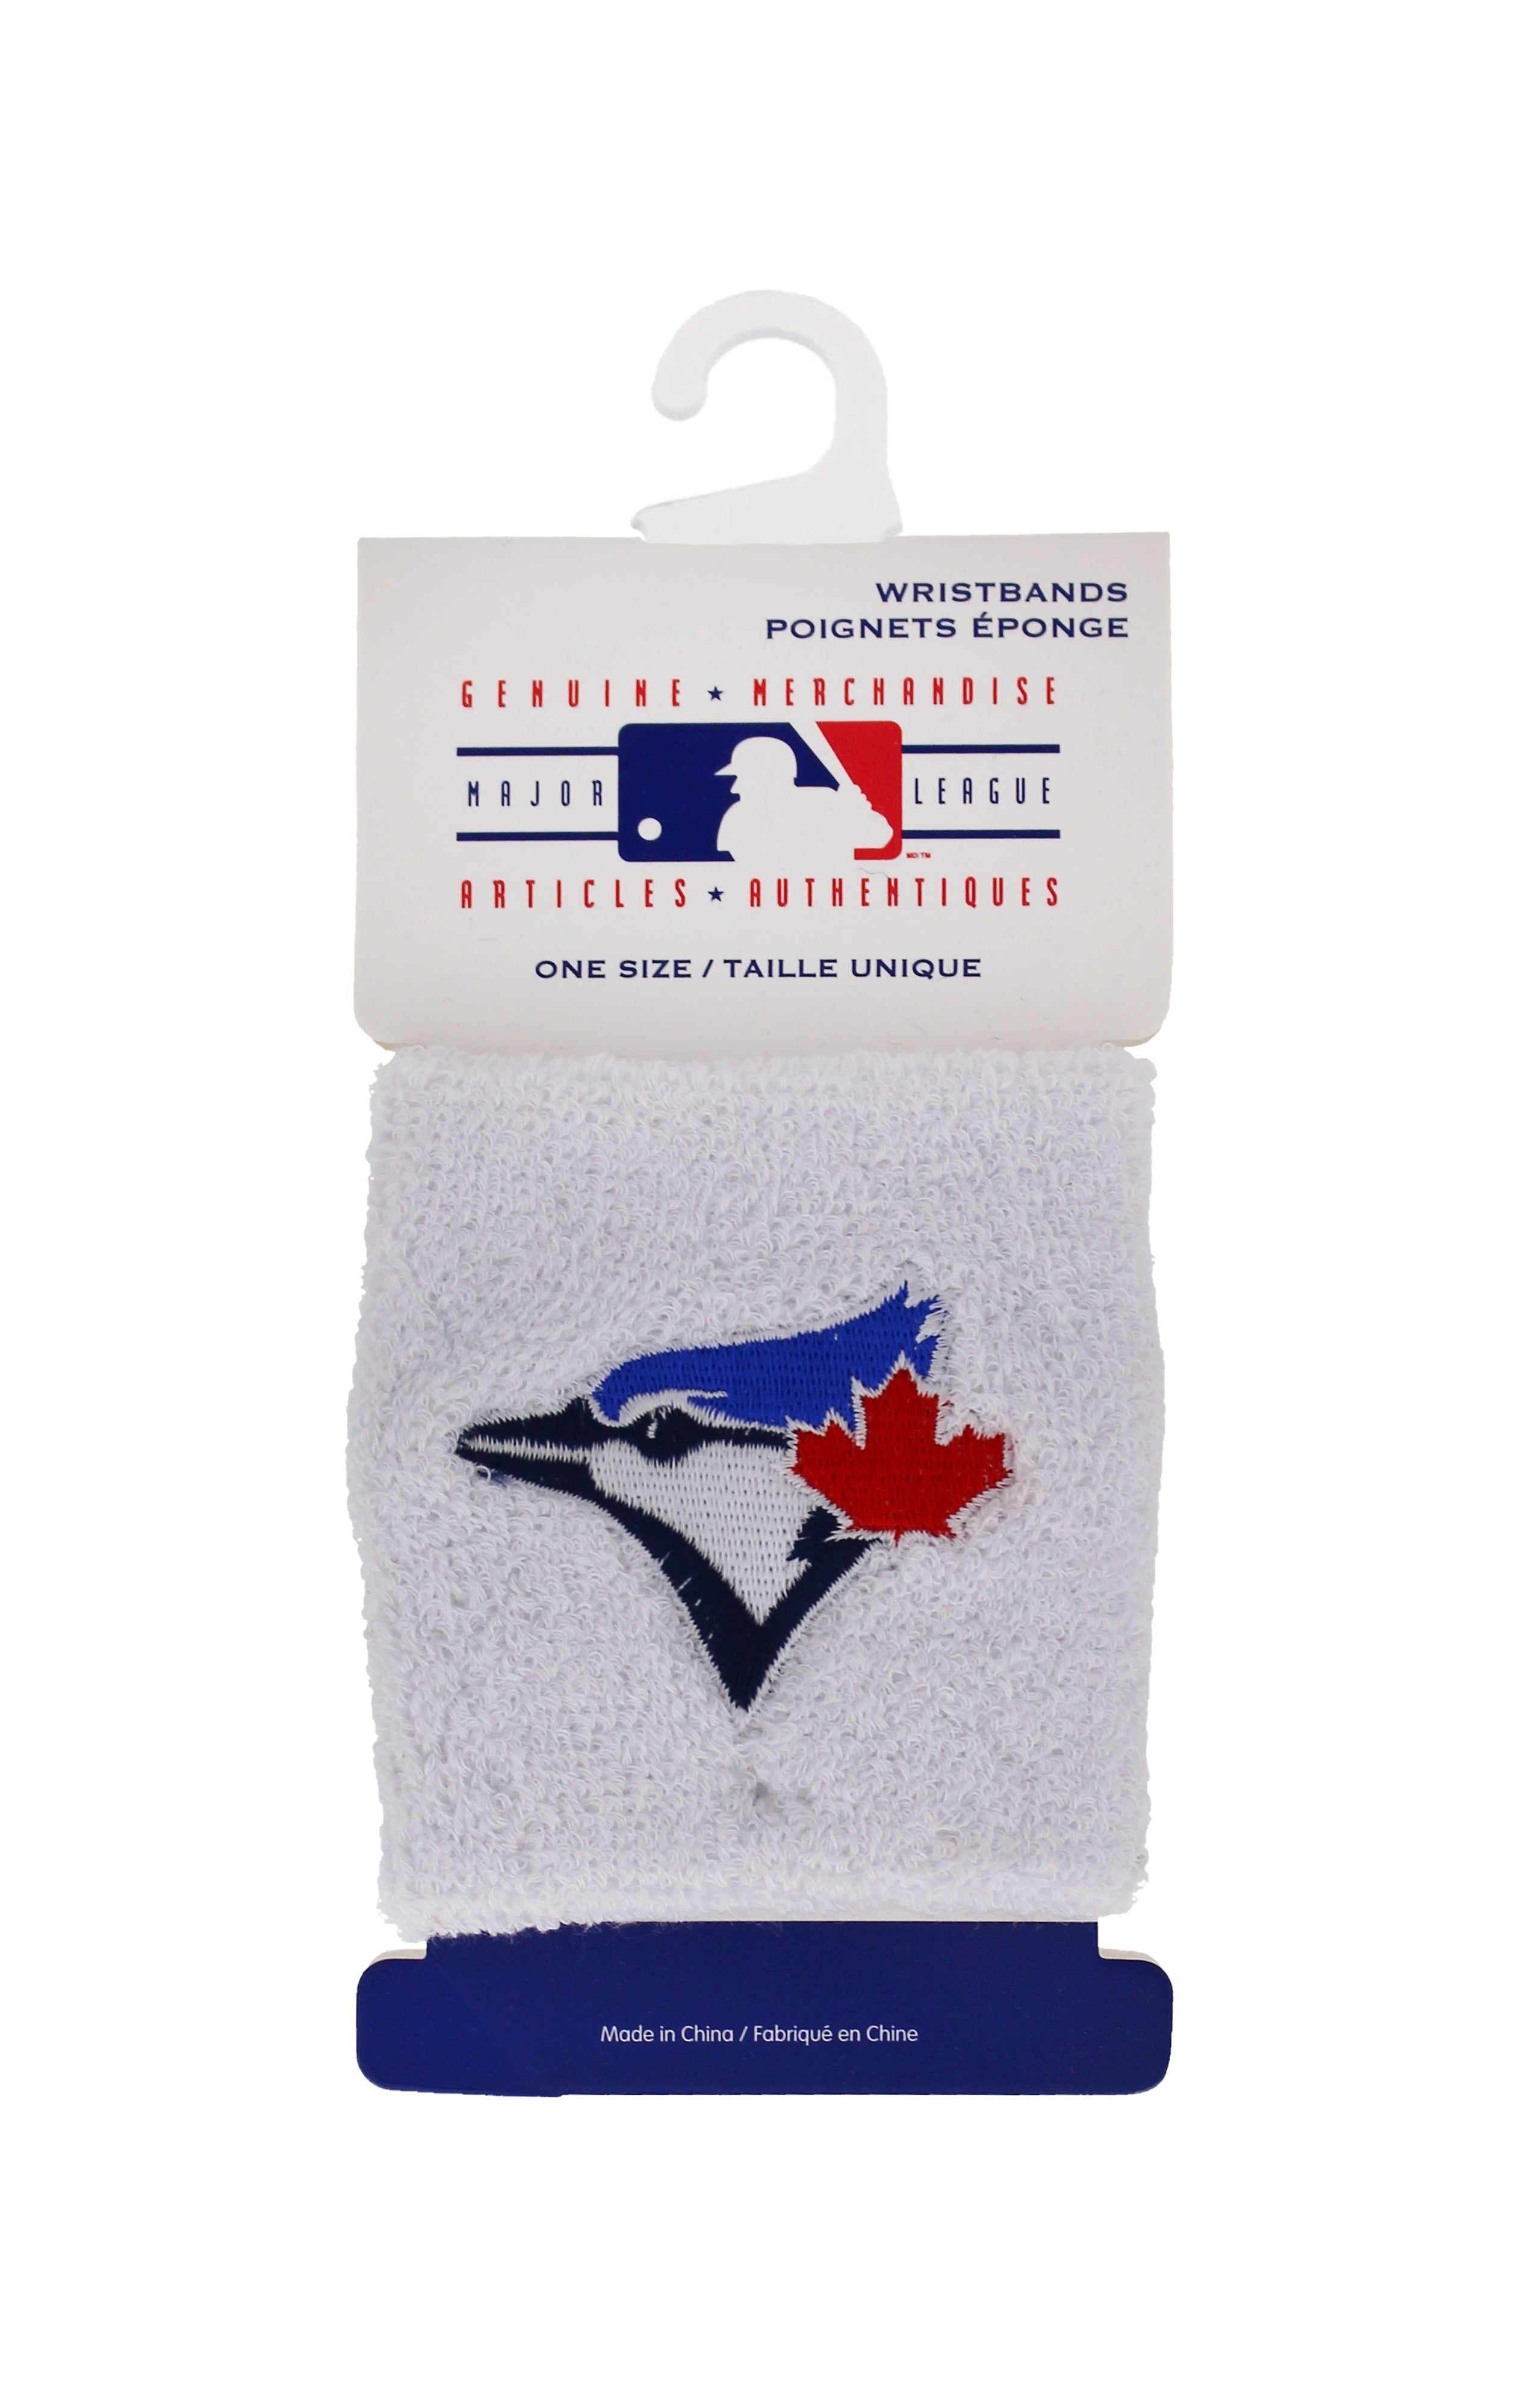 Blue Jays Accessories - Wristbands White s/2